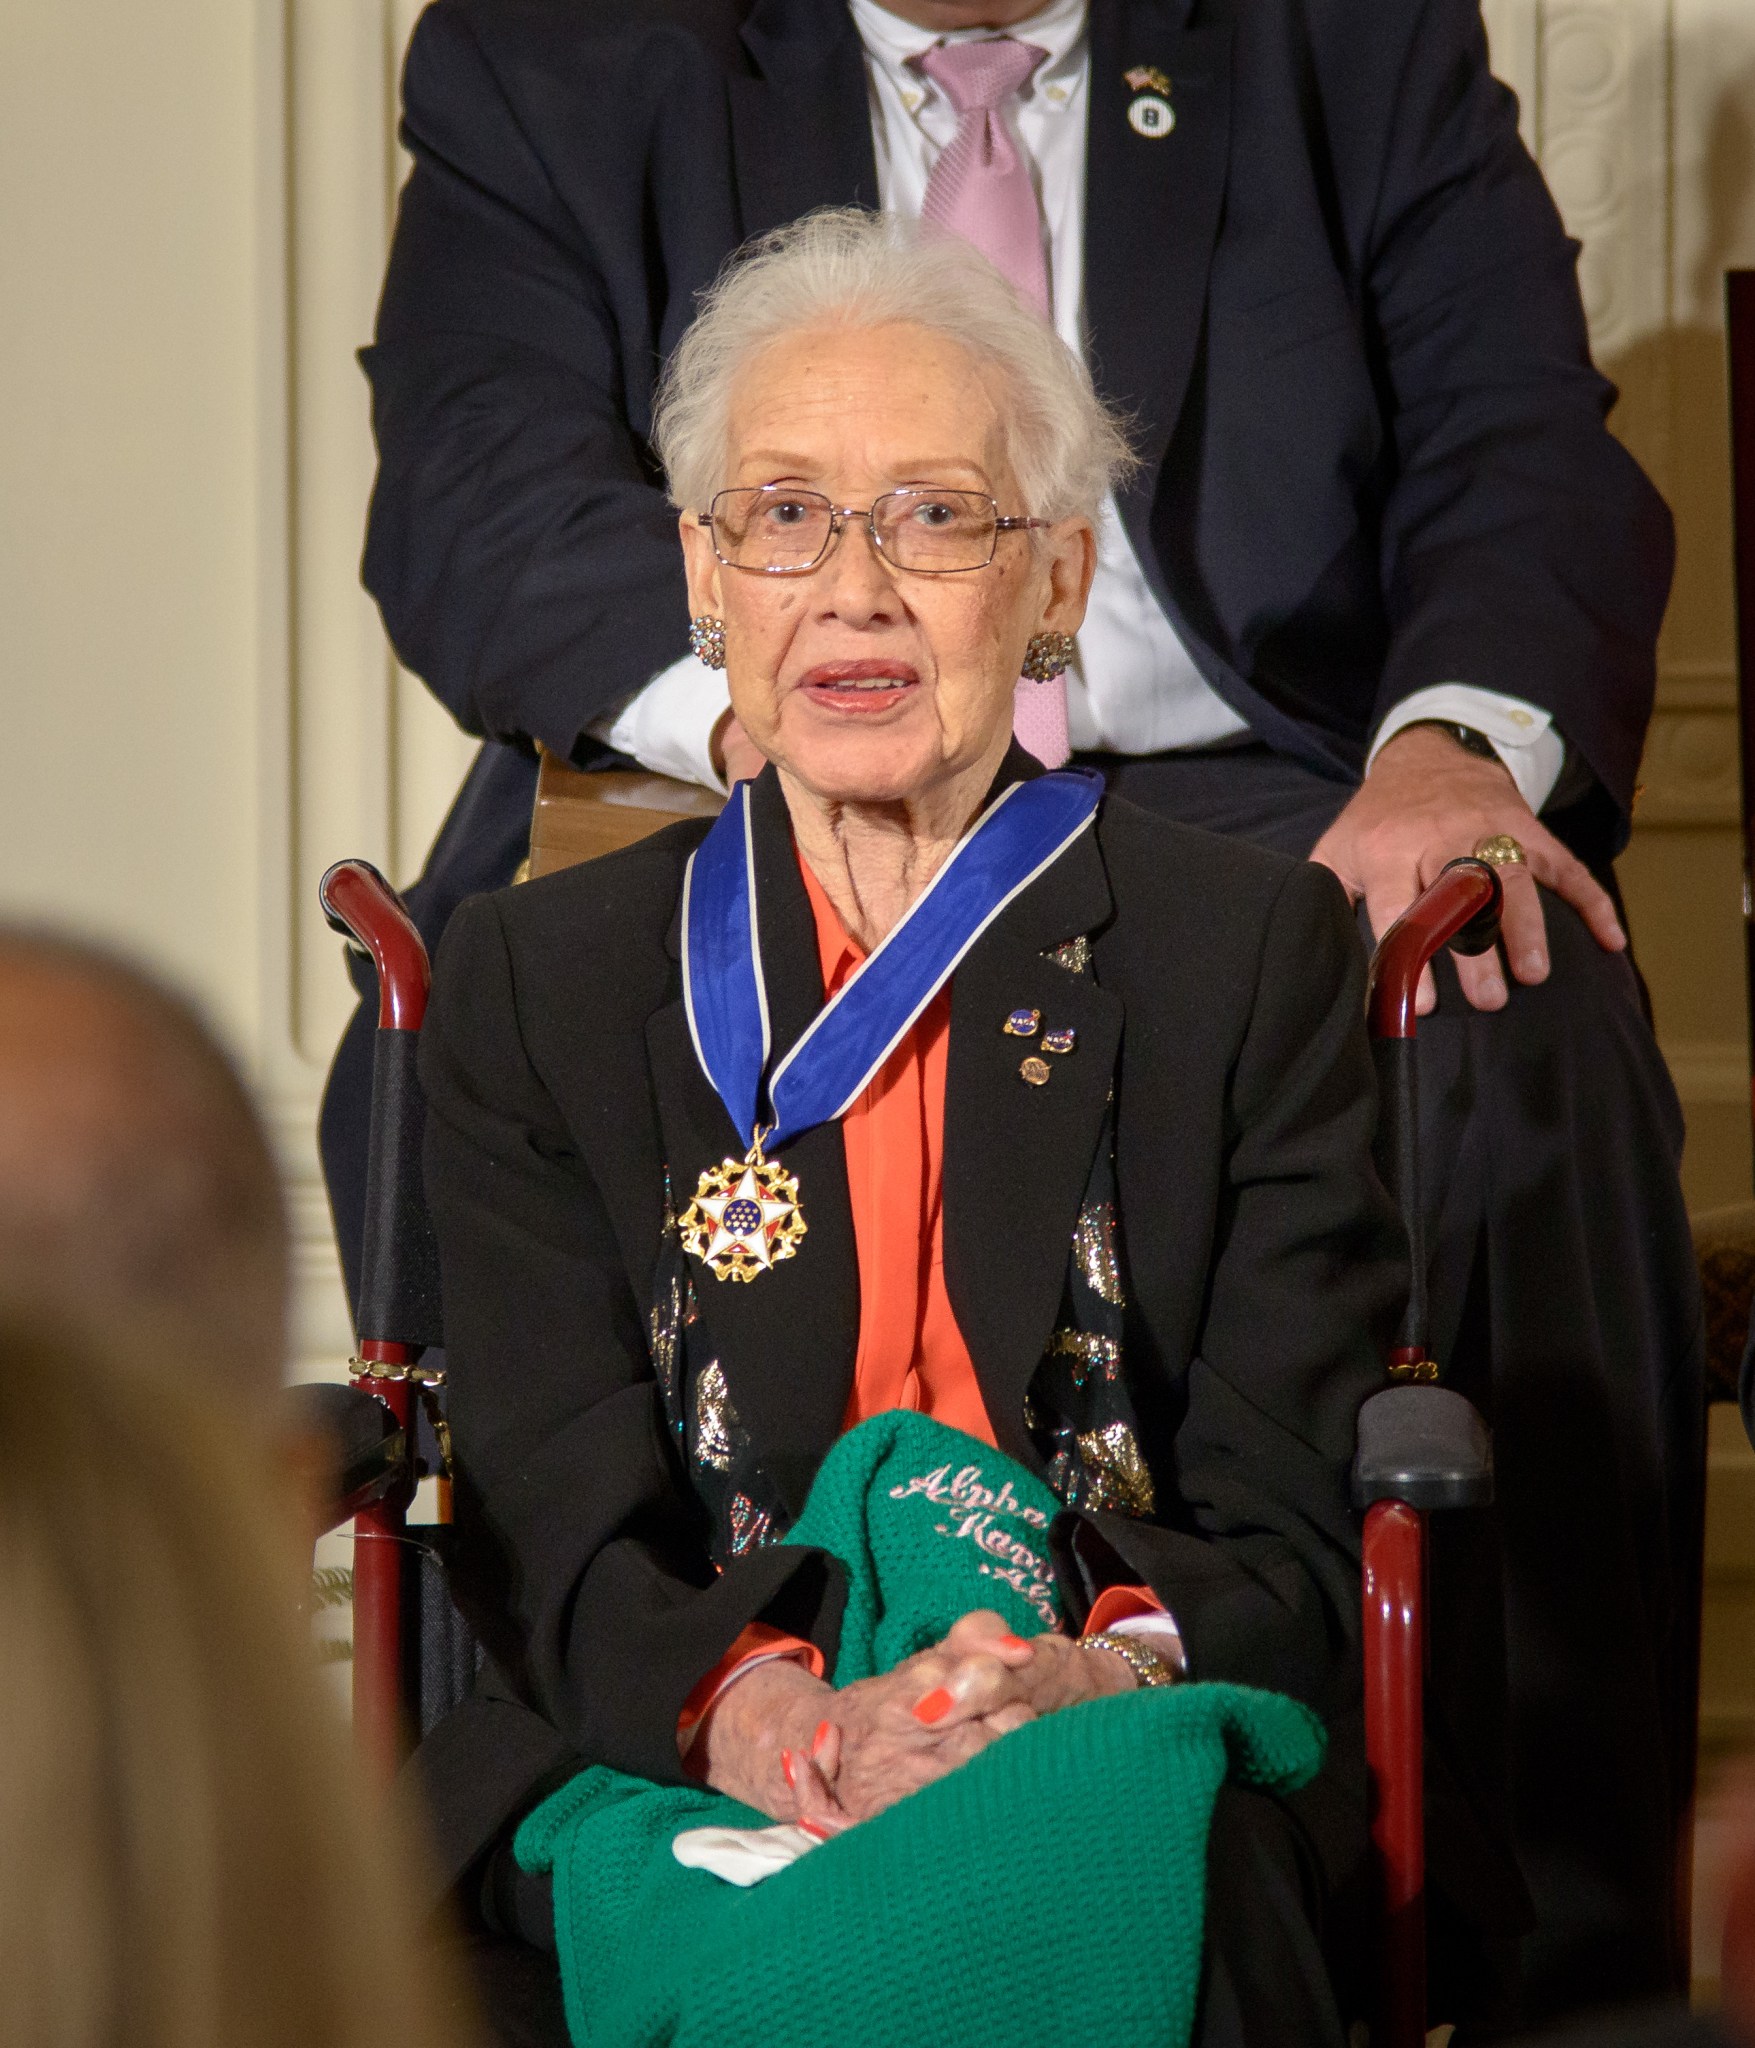 Former NASA mathematician Katherine Johnson is seen after President Barack Obama presented her with the Presidential Medal of Freedom, Tuesday, Nov. 24, 2015, during a ceremony in the East Room of the White House in Washington.